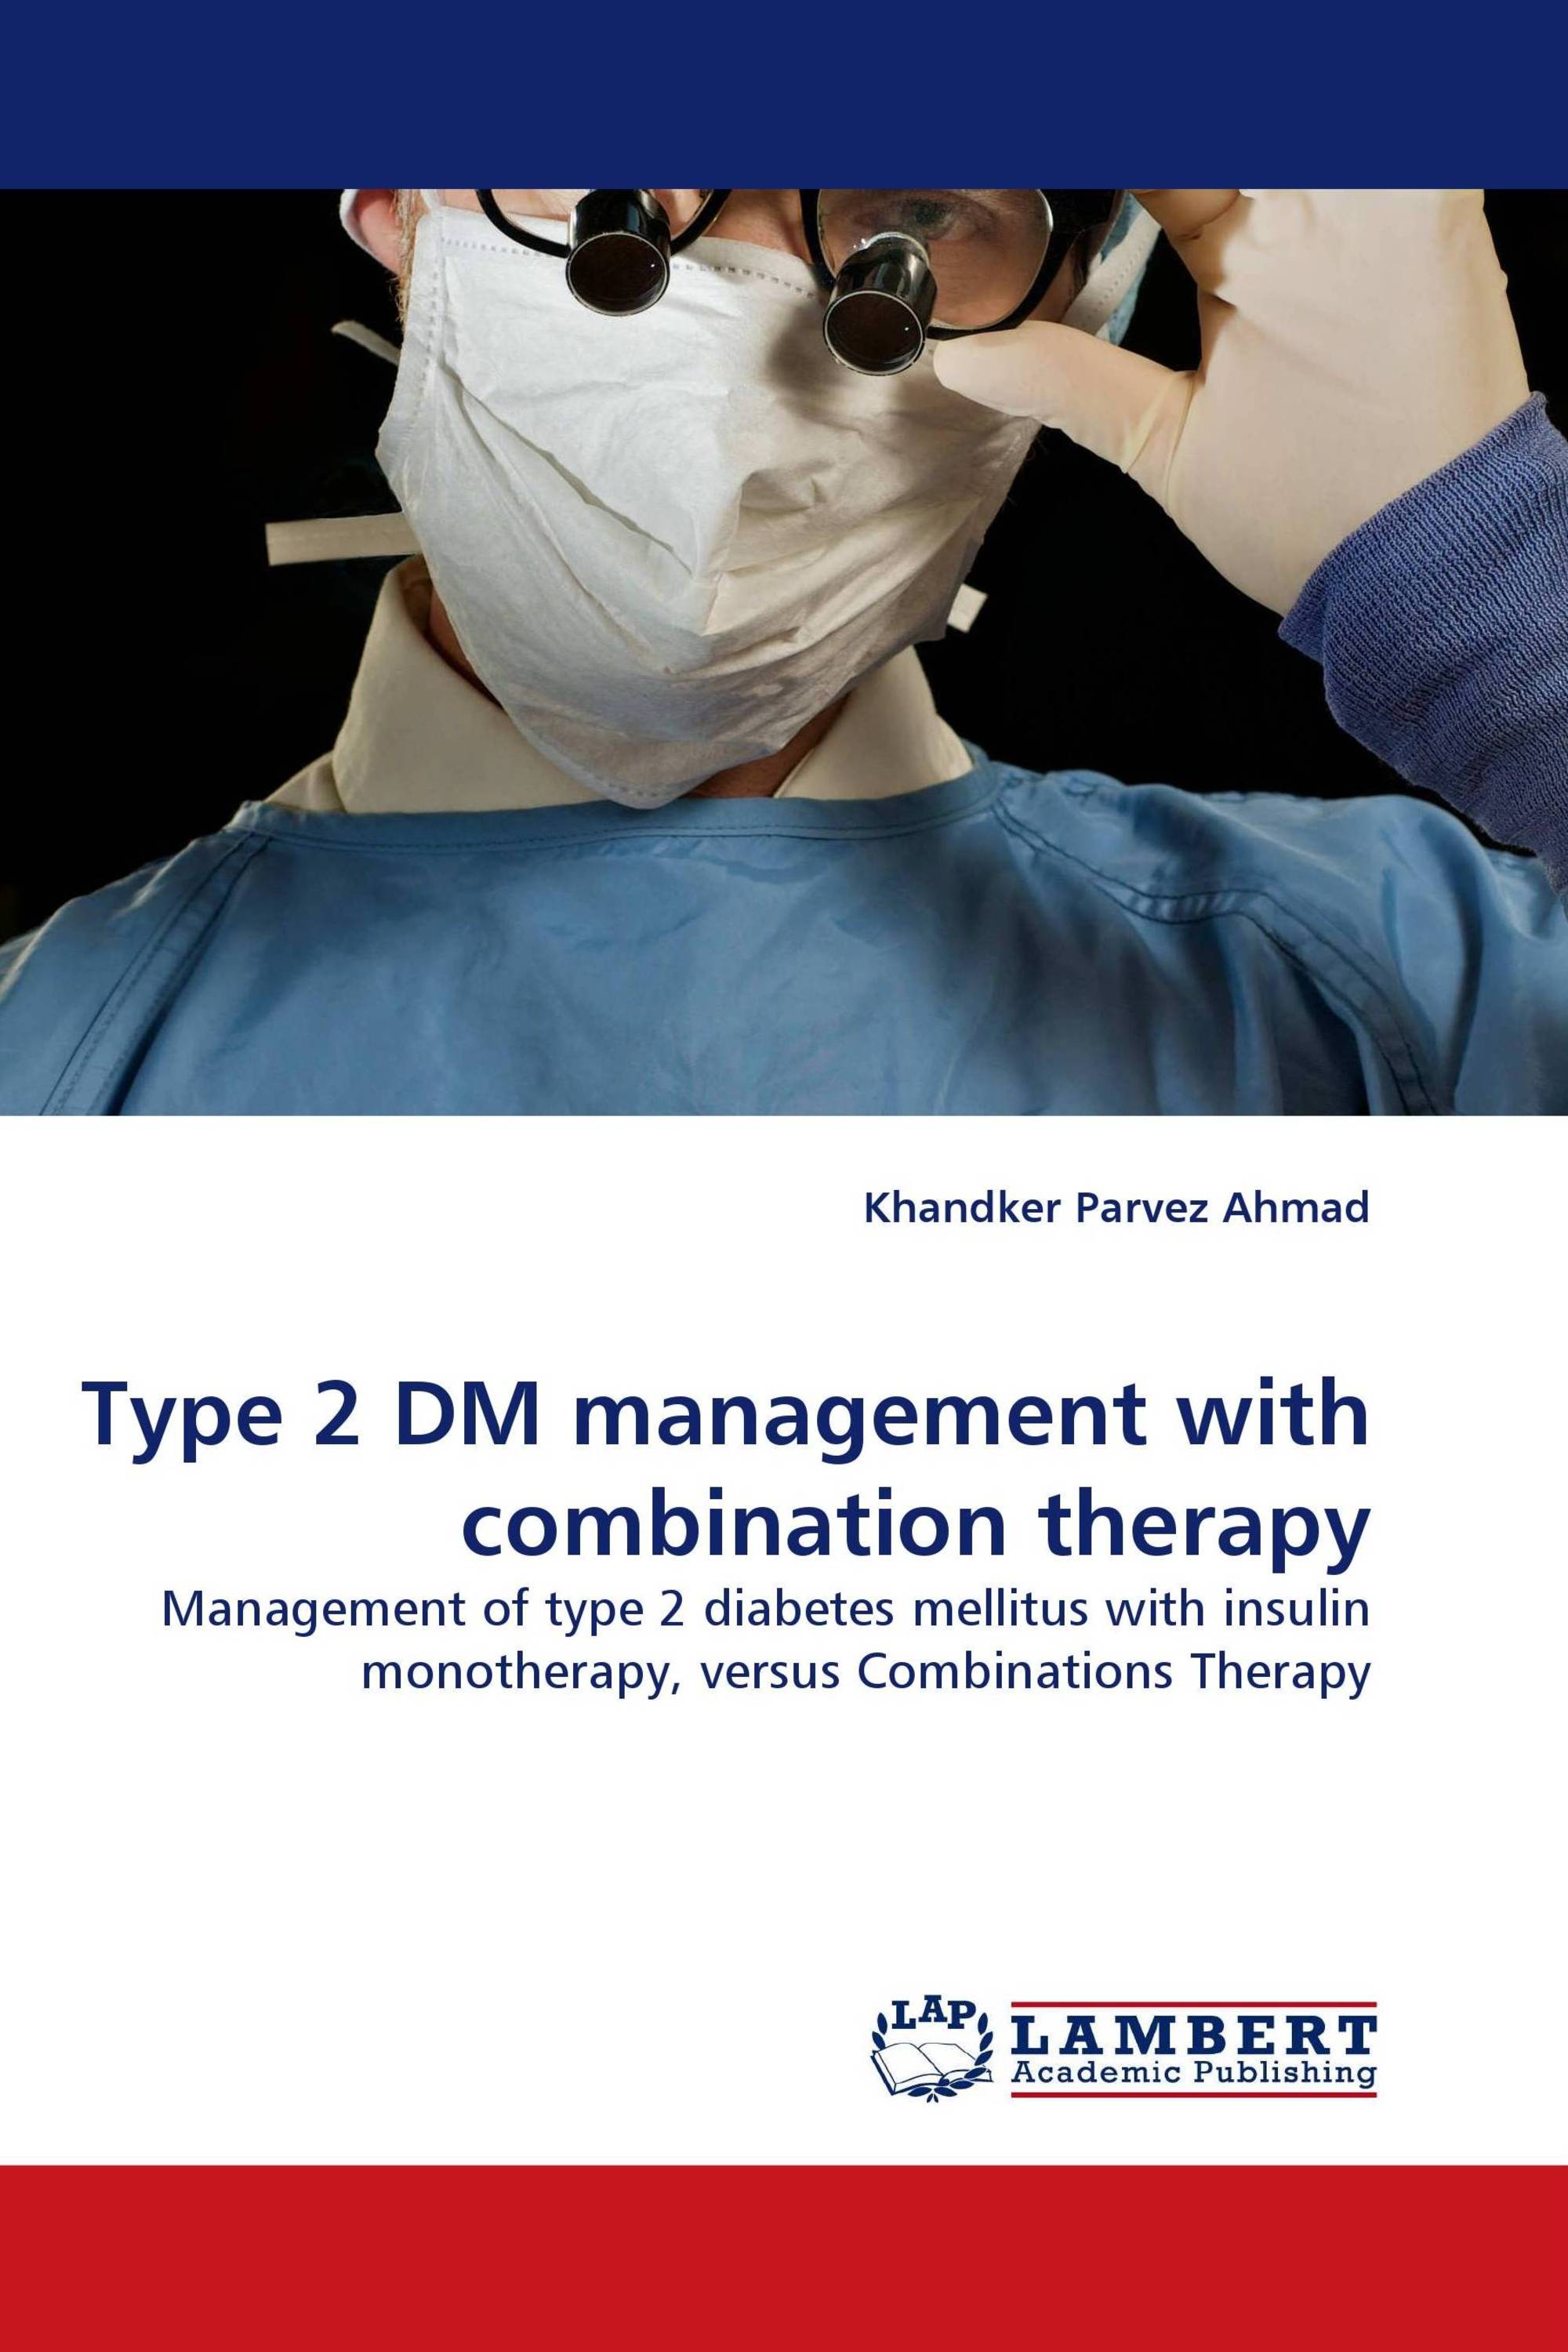 Type 2 DM management with combination therapy